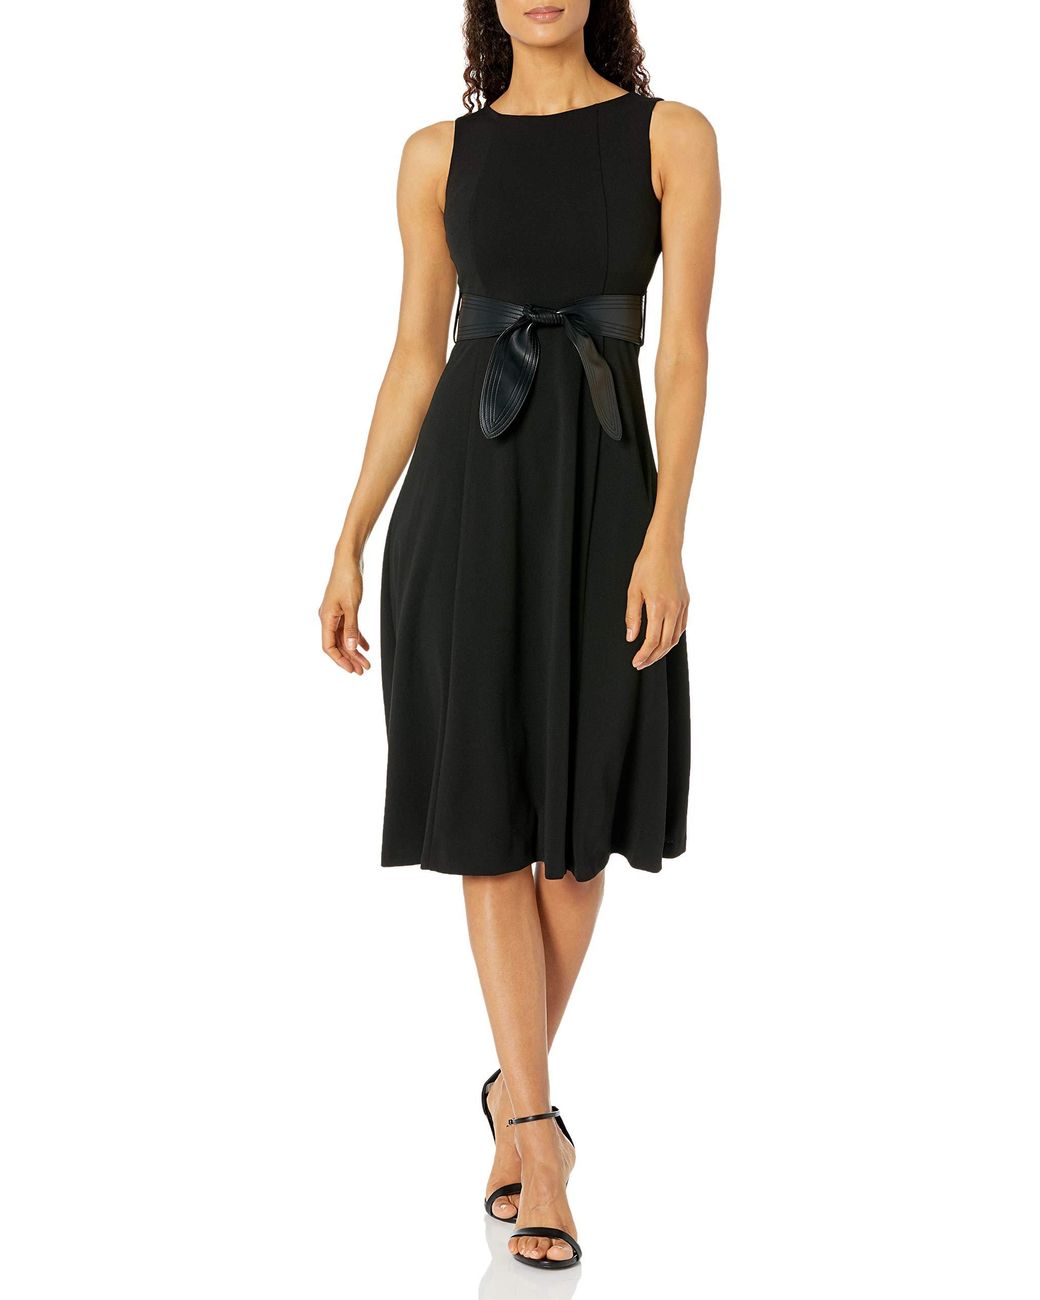 Calvin Klein Sleeveless Midi Dress With Faux Leather Belt in Black - Lyst